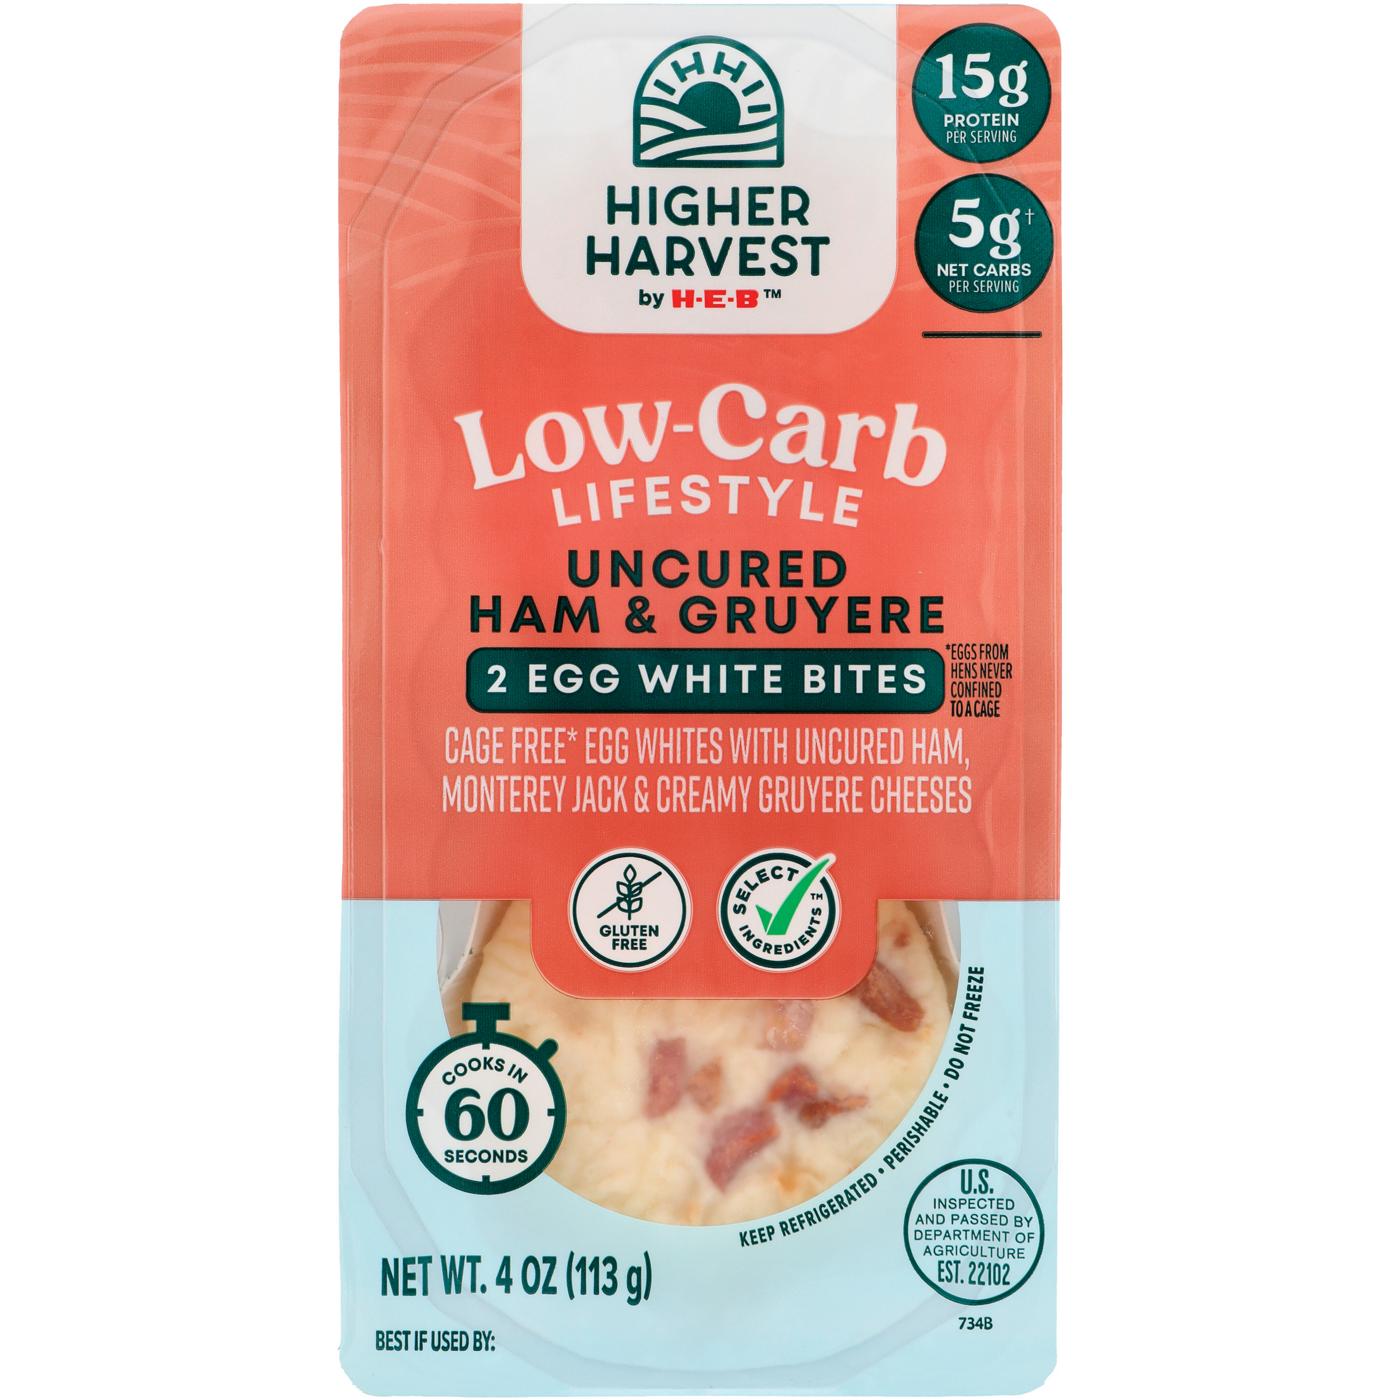 Higher Harvest by H-E-B Low-Carb Lifestyle Egg White Bites – Uncured Ham & Gruyere Cheese; image 1 of 2